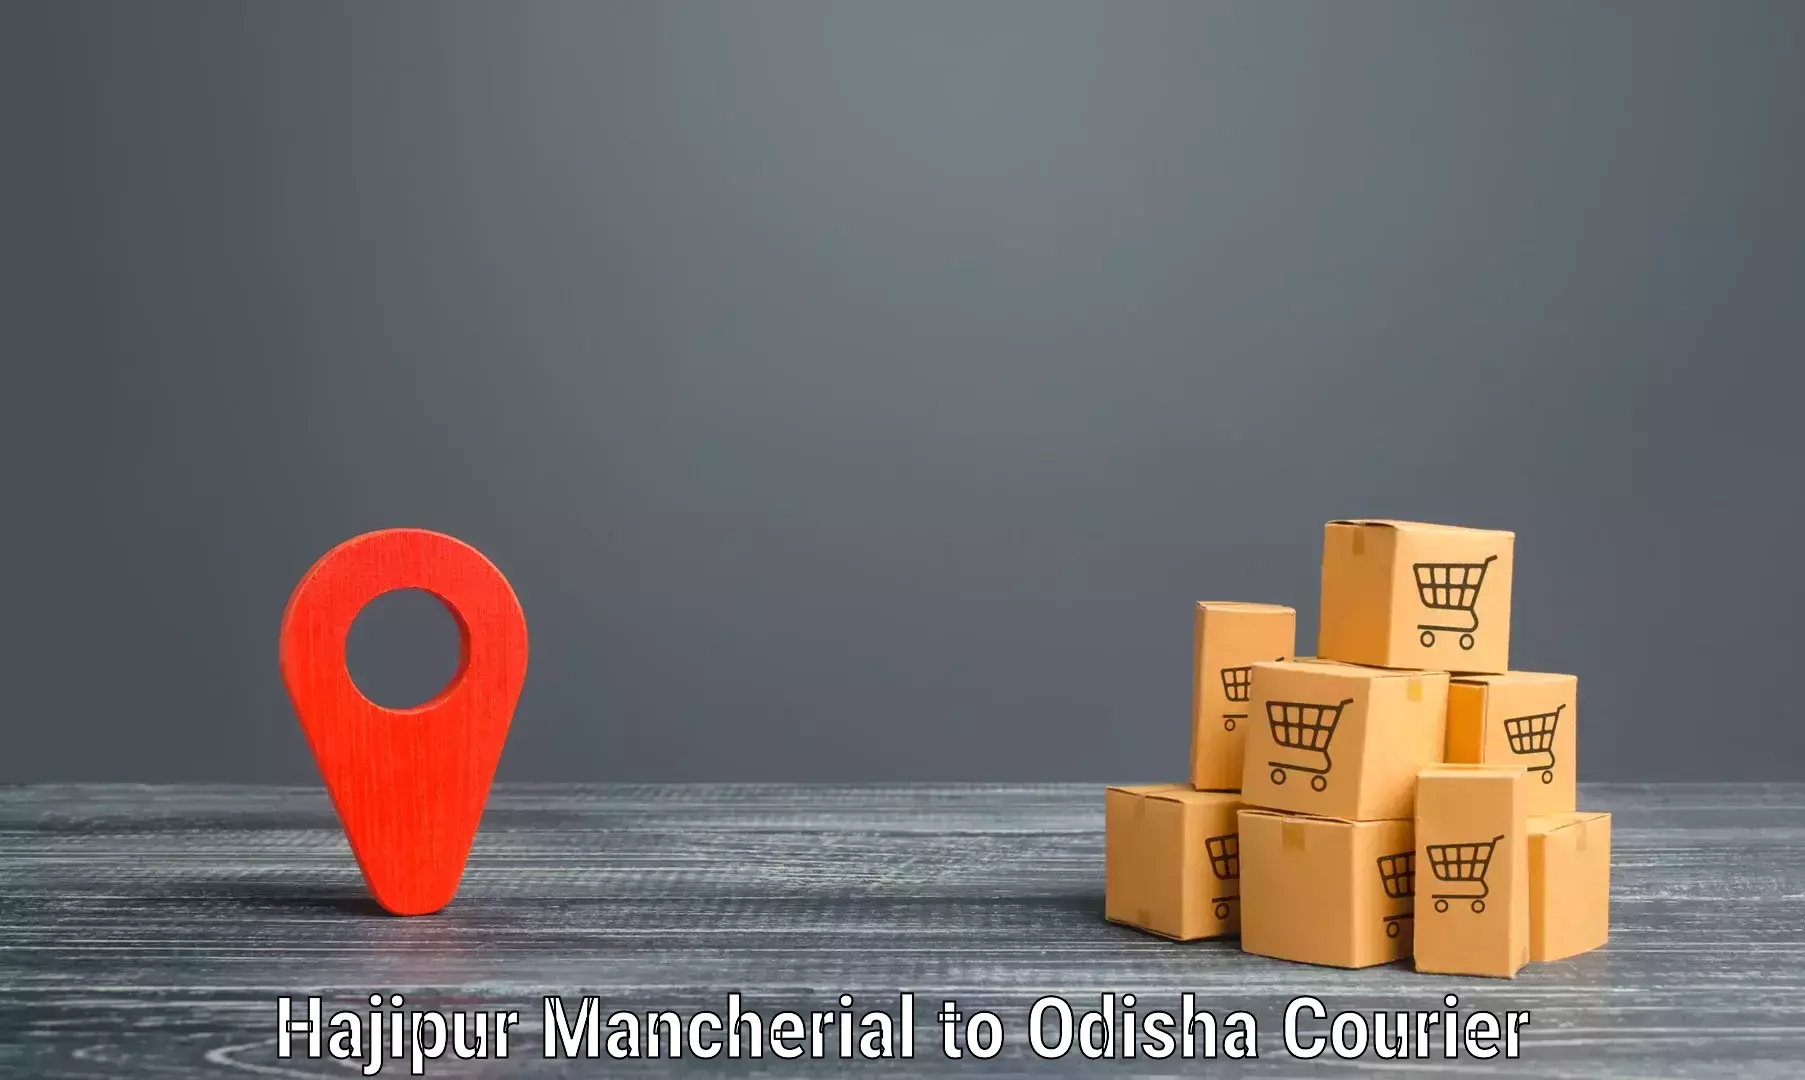 Affordable parcel service Hajipur Mancherial to Dhamara